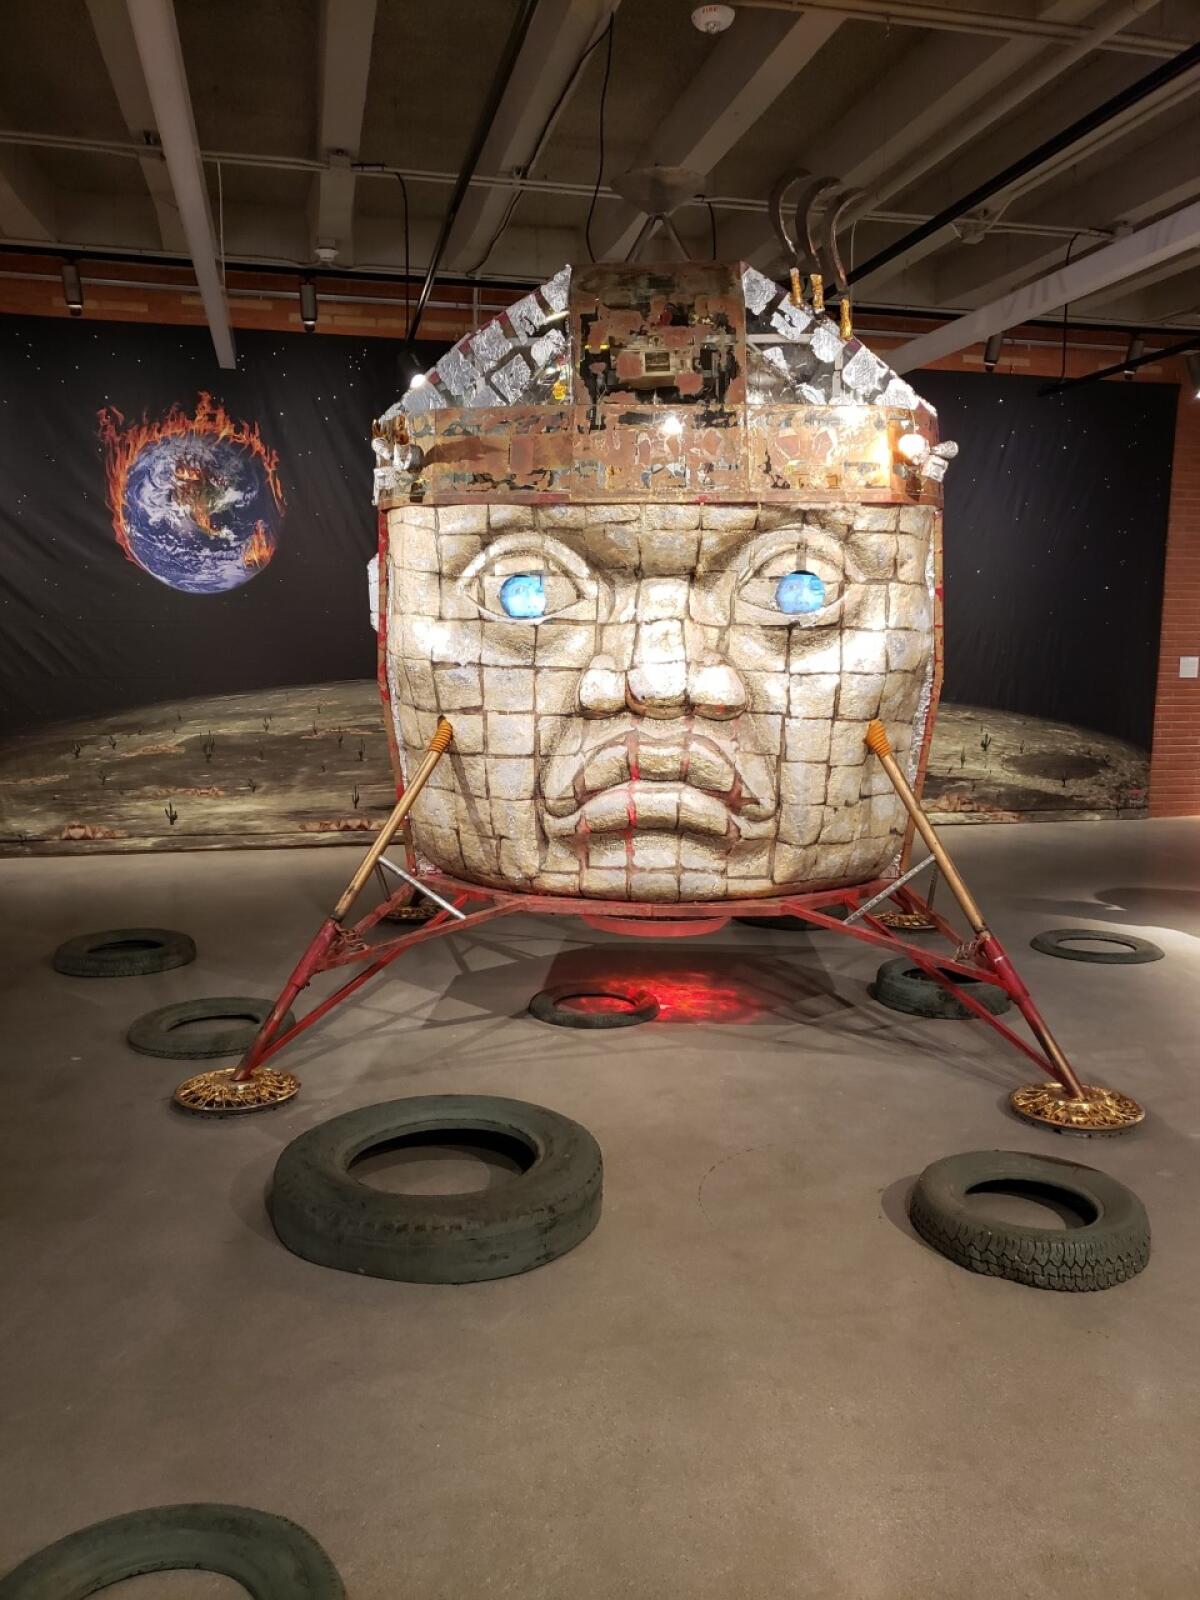 An Olmec head is fused with a lunar landing vehicle with an image of a flaming Earth as backdrop in an art installation.